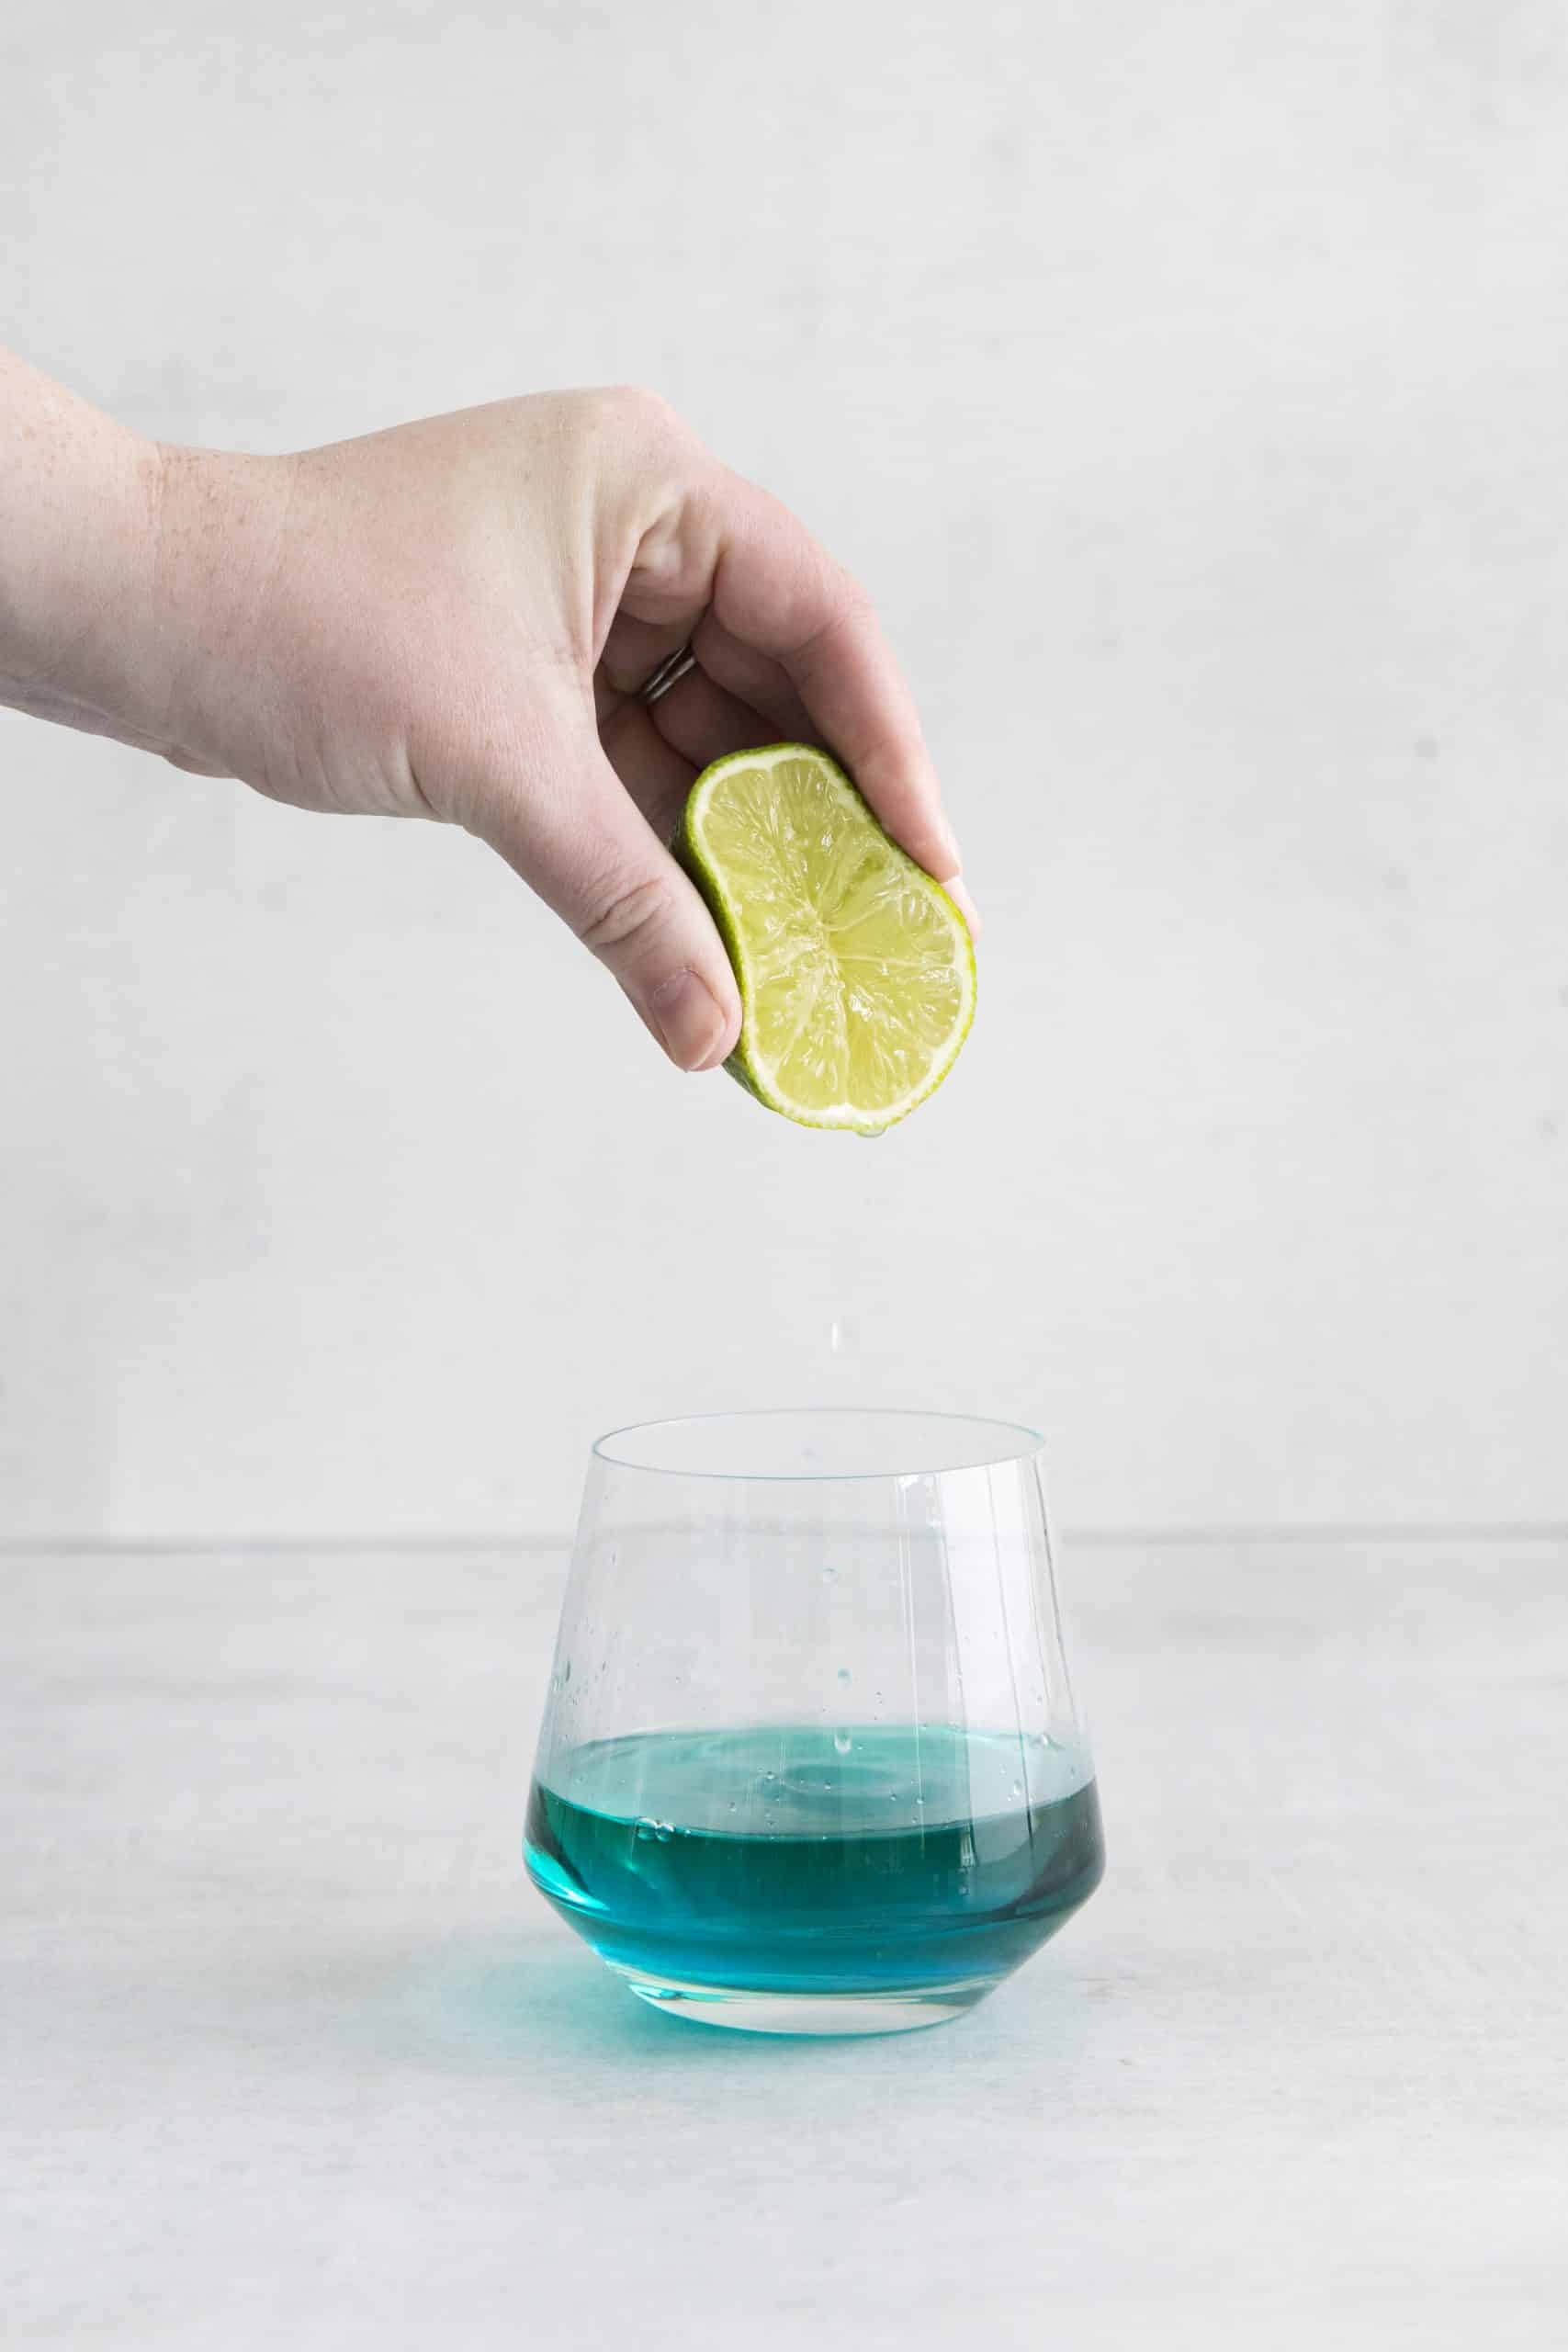 lime being squeezed into a glass with green liquid